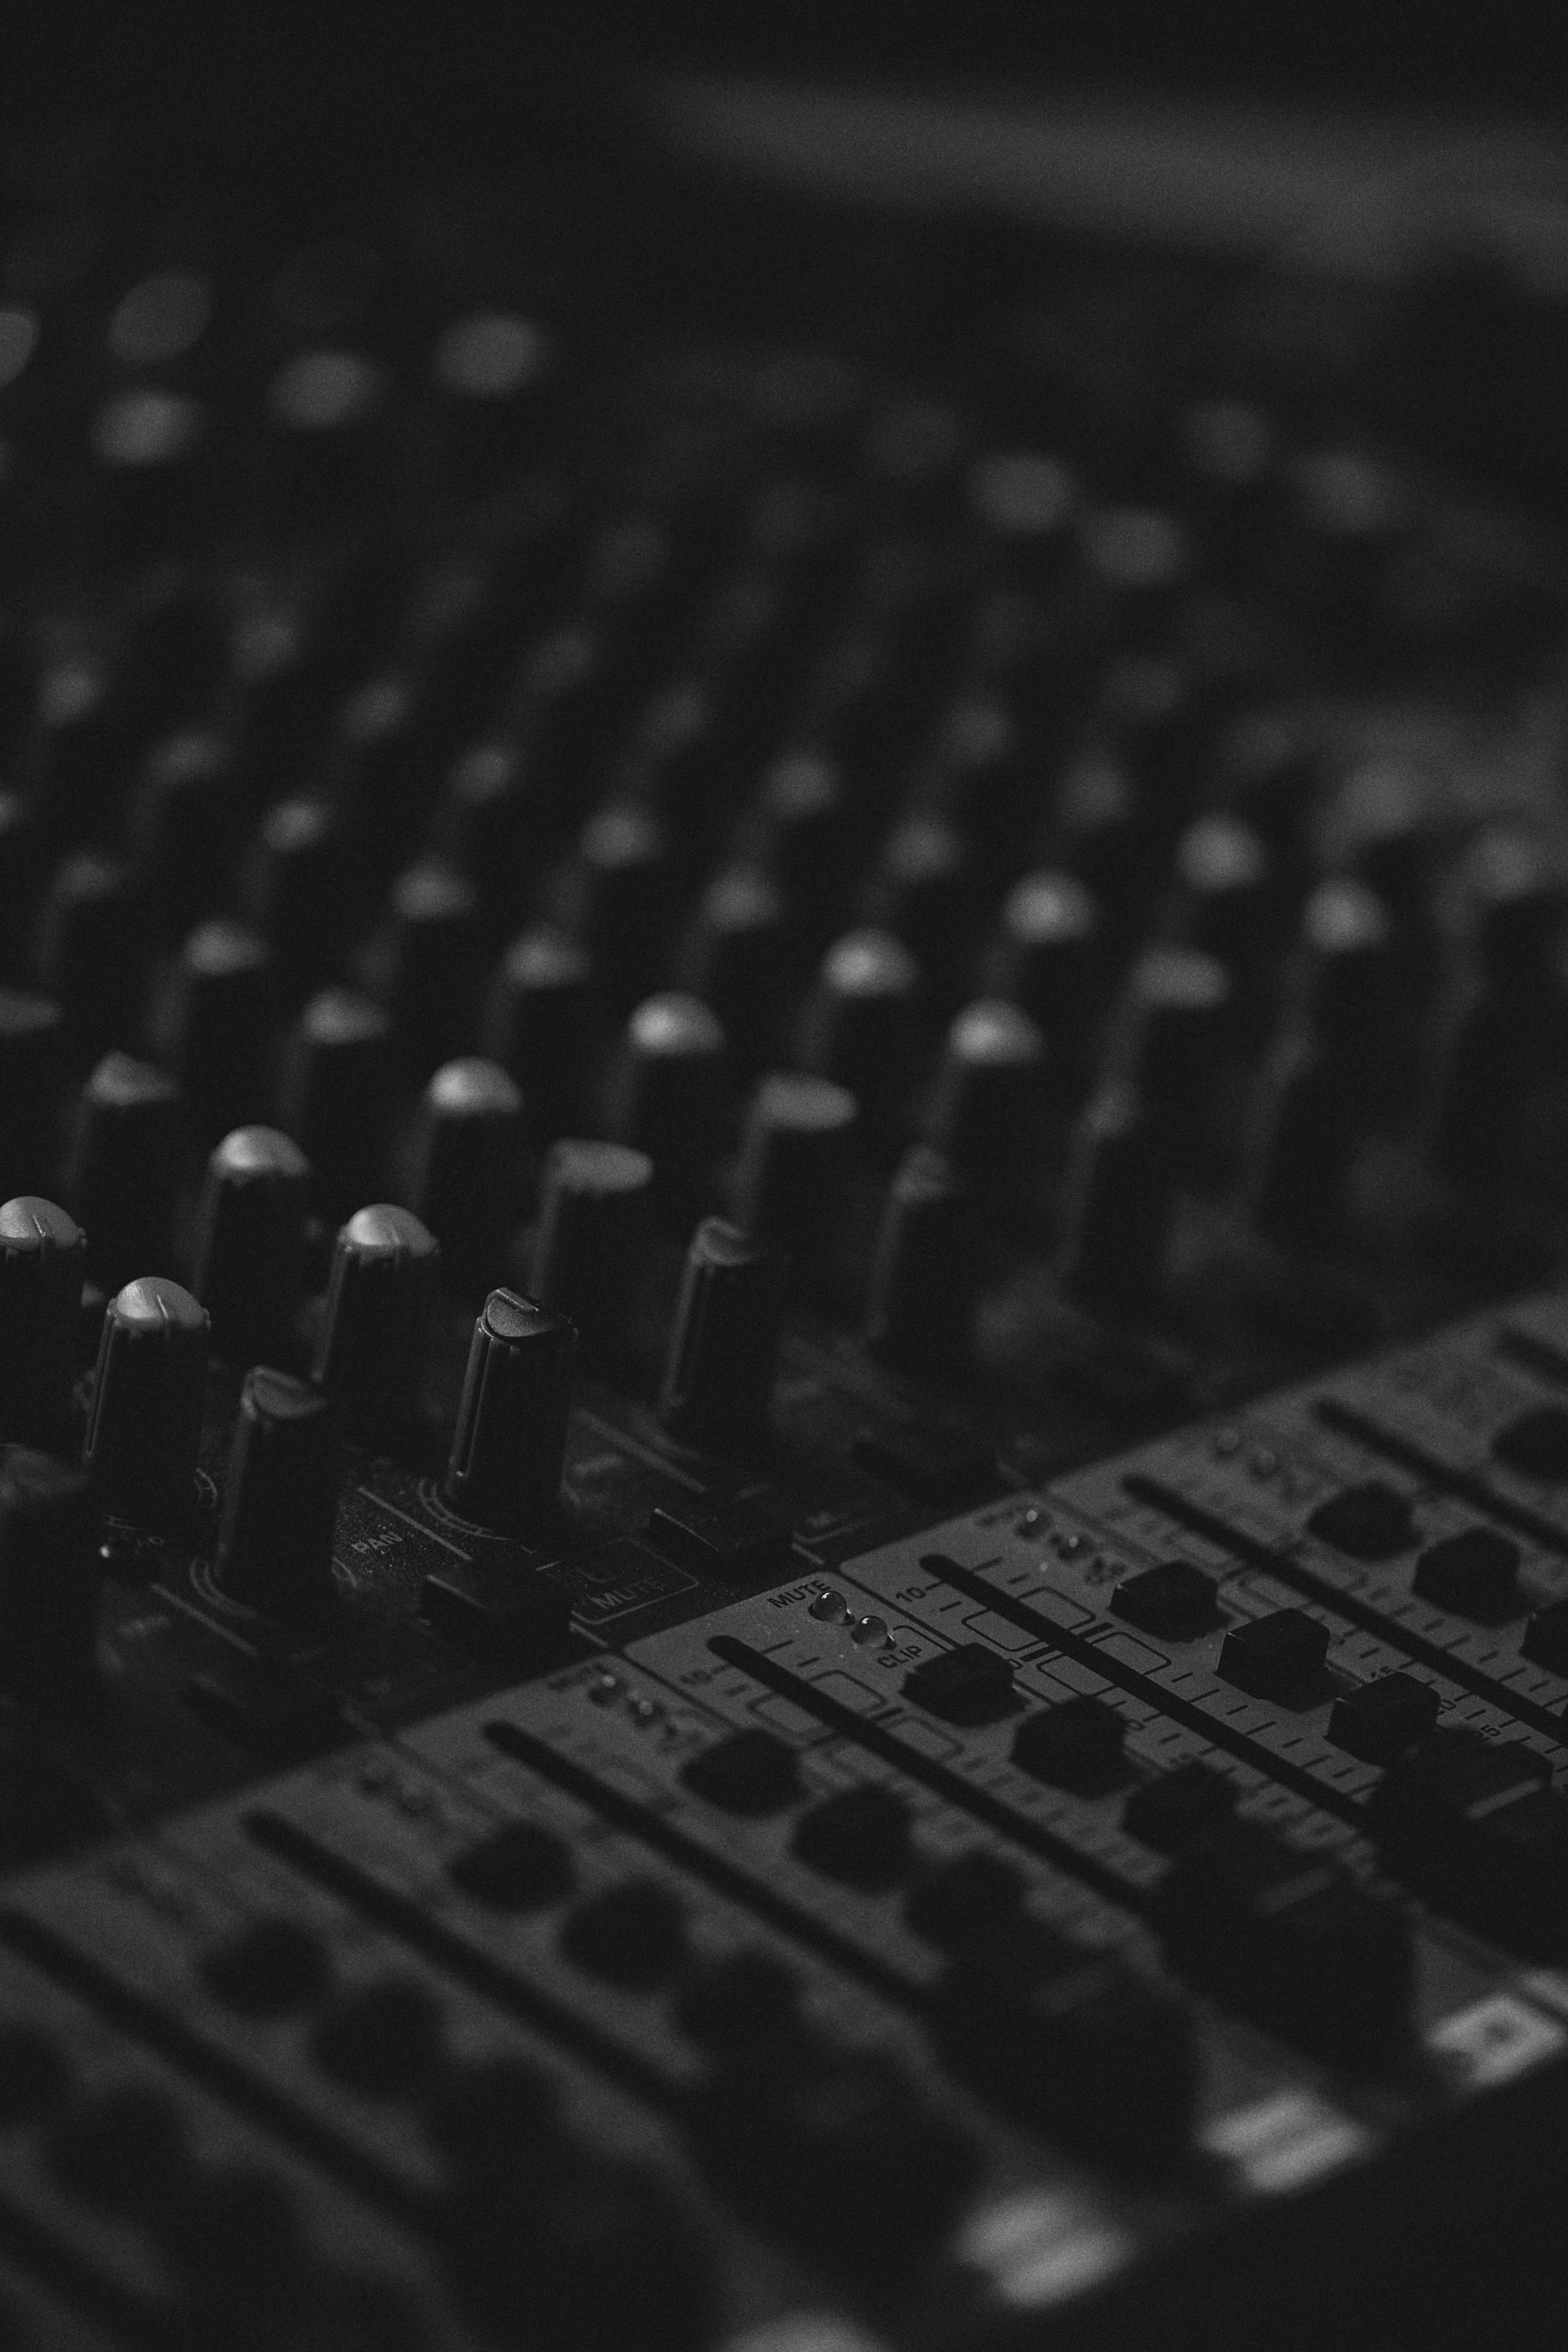 Close up photo of an audio mixing board. Photo by Joonas Sild.